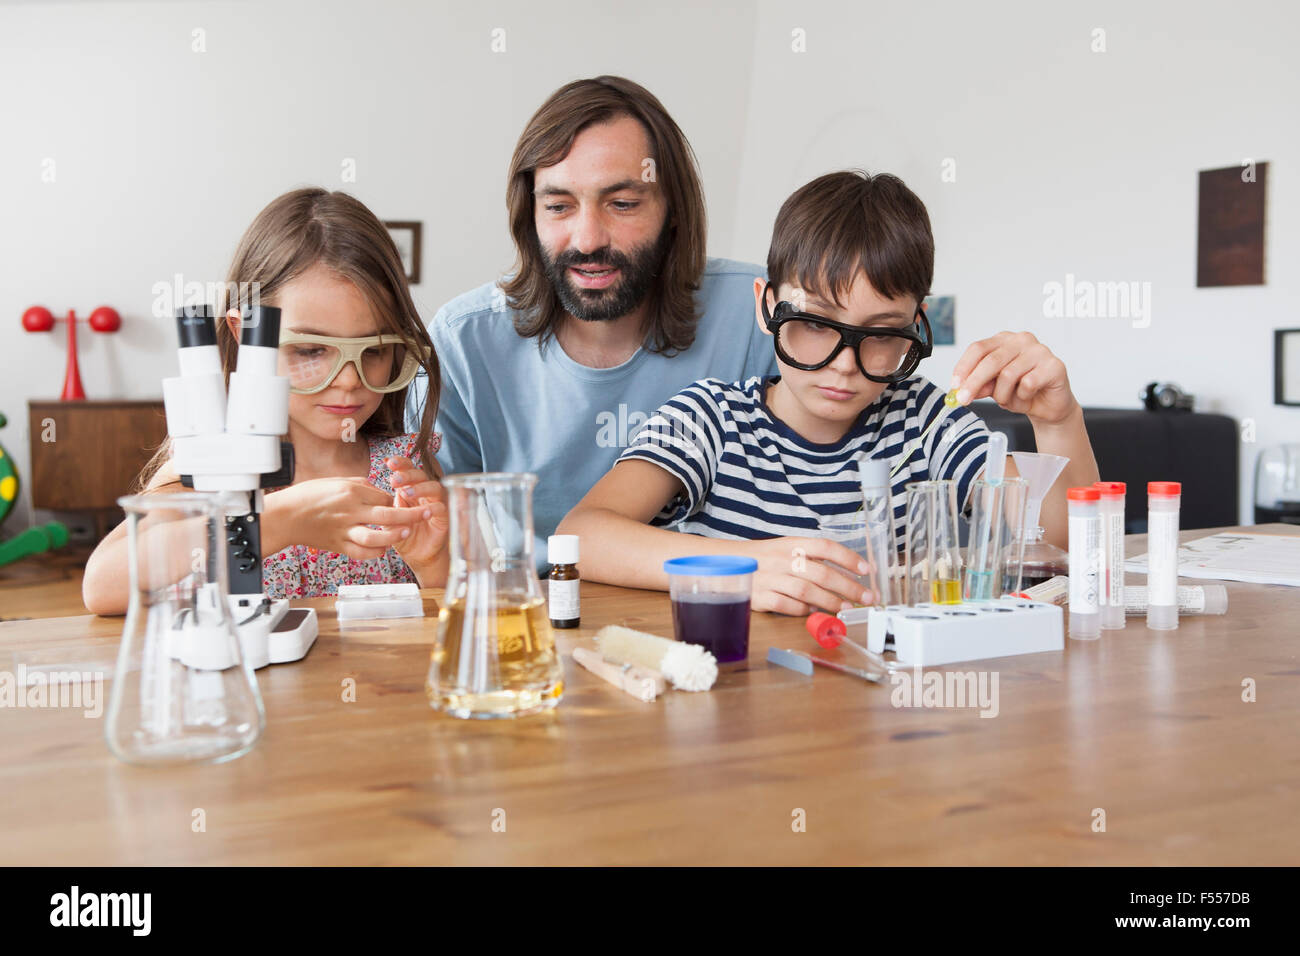 Father assisting children in doing school science project at home Stock Photo